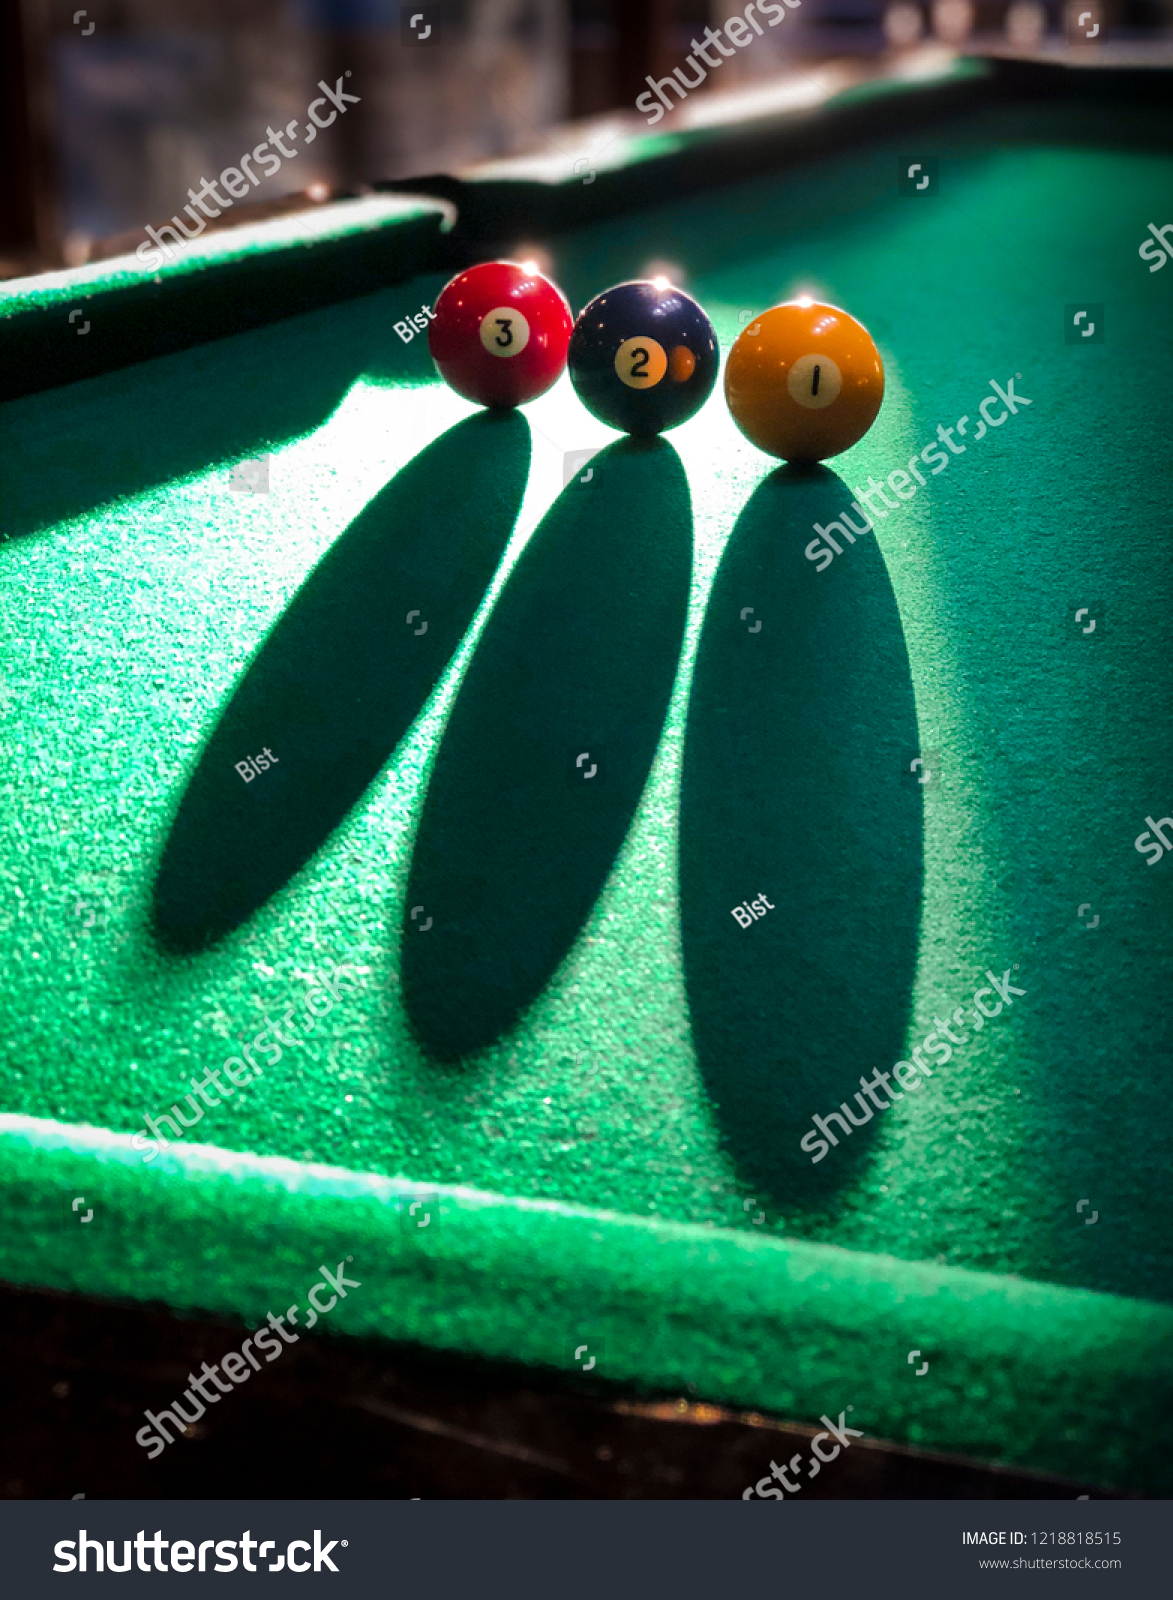 How To Set Up Pool Table : Snooker Table Setup Stock Photo Download Image Now Istock : Search for info about pool table setup.